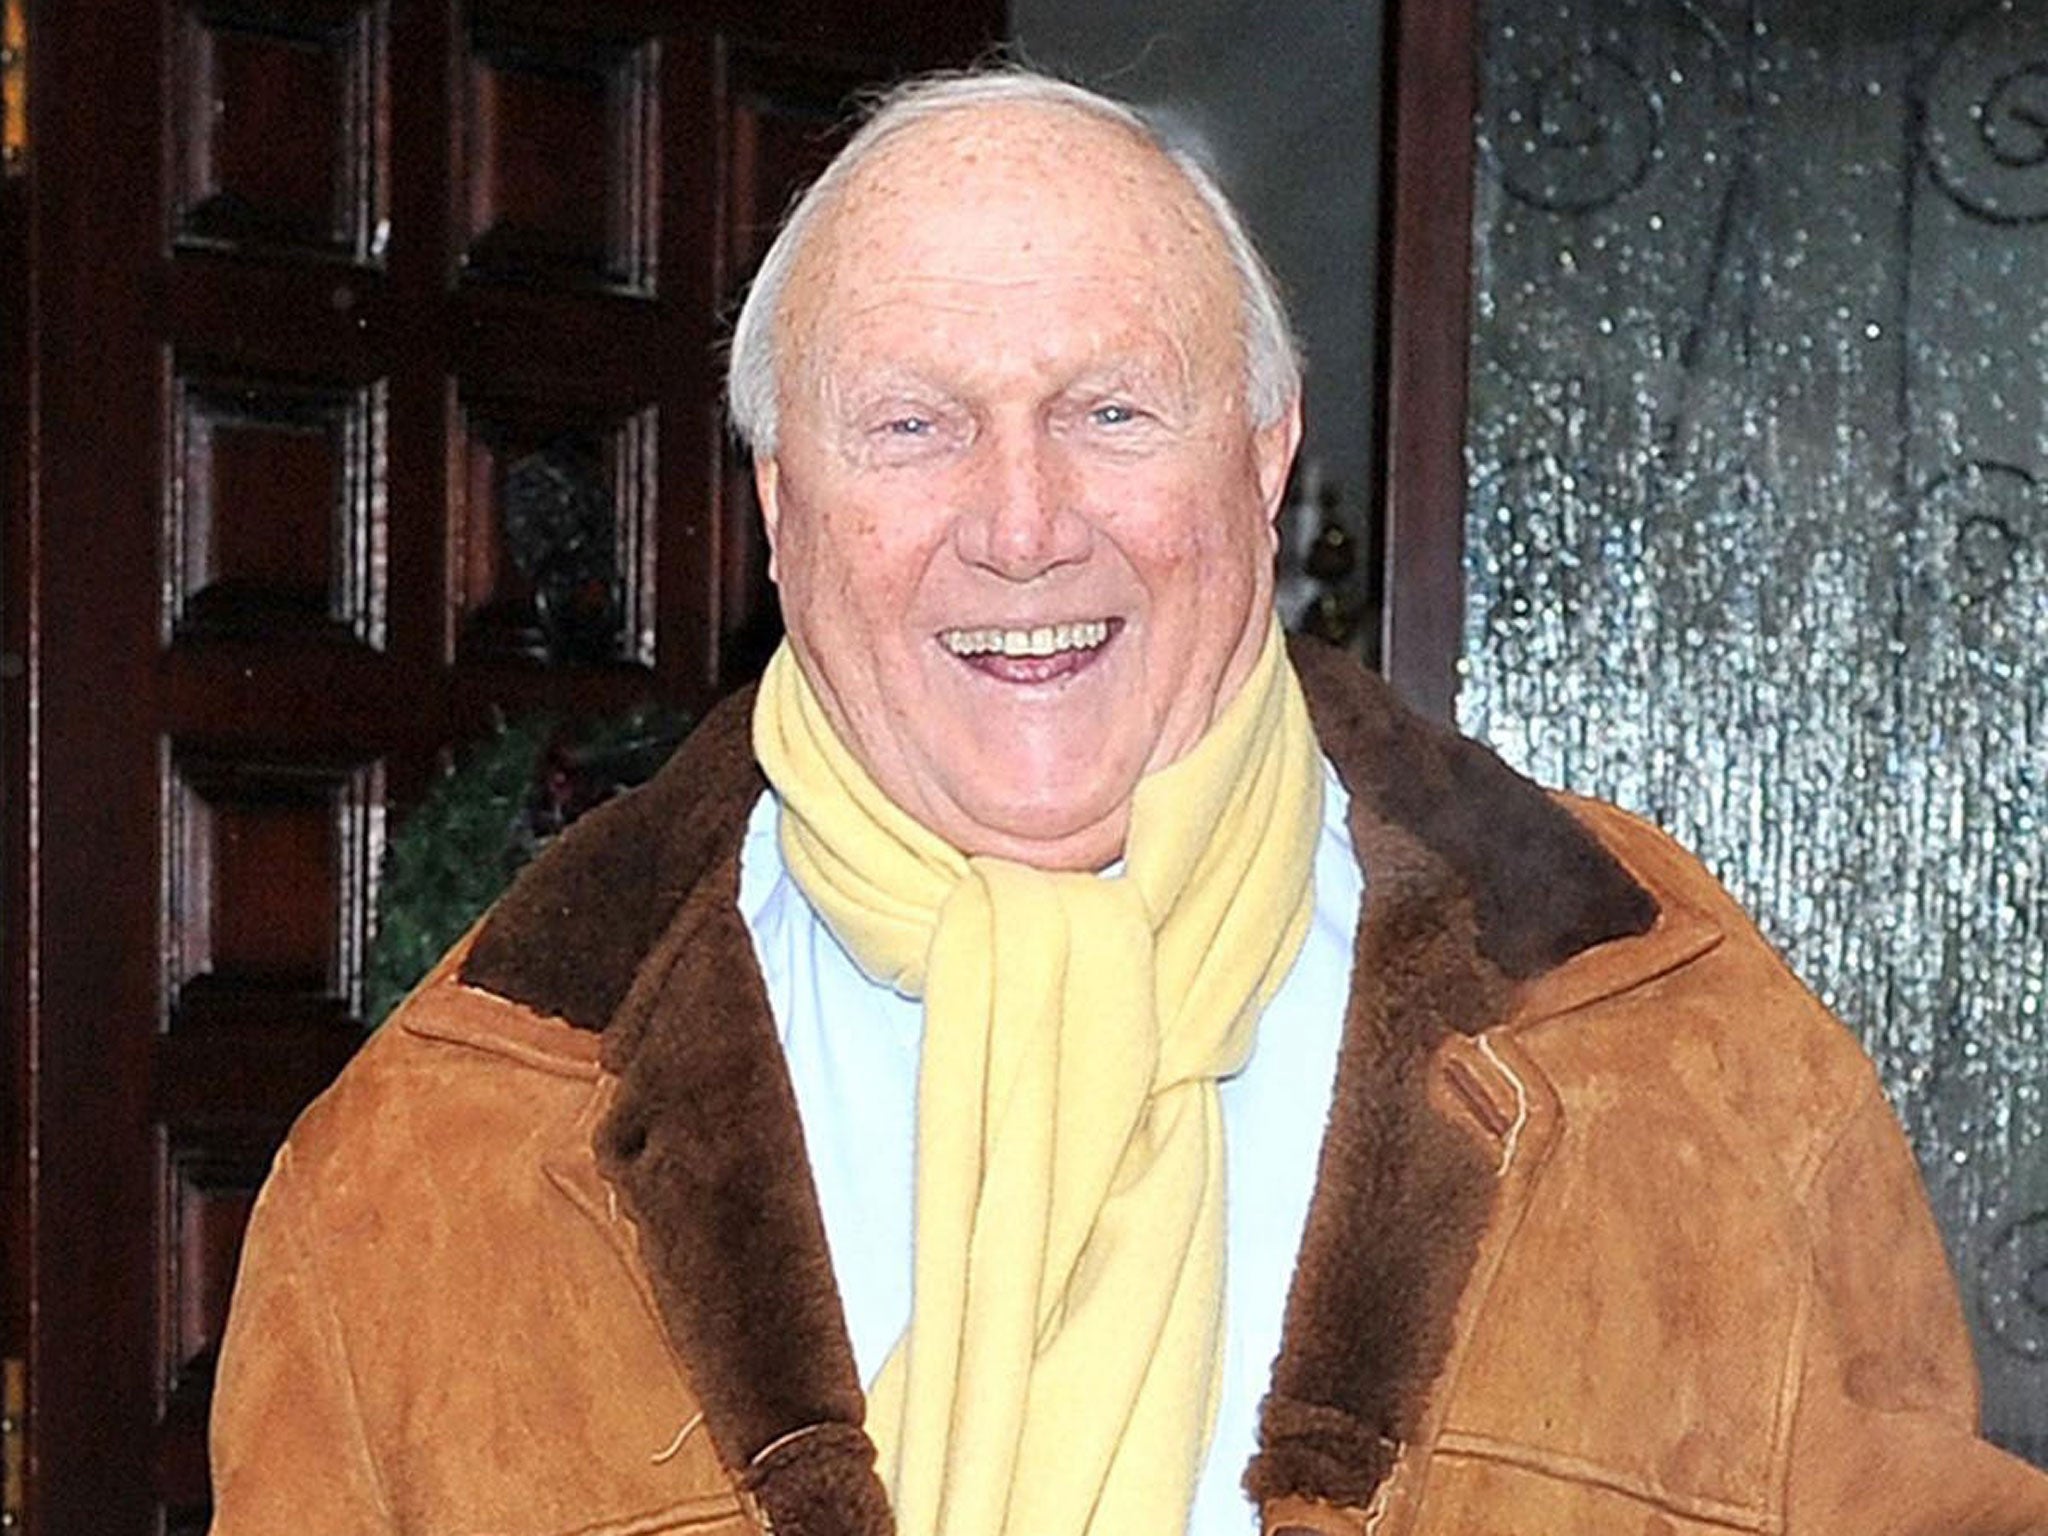 Police are investigating allegations against Stuart Hall